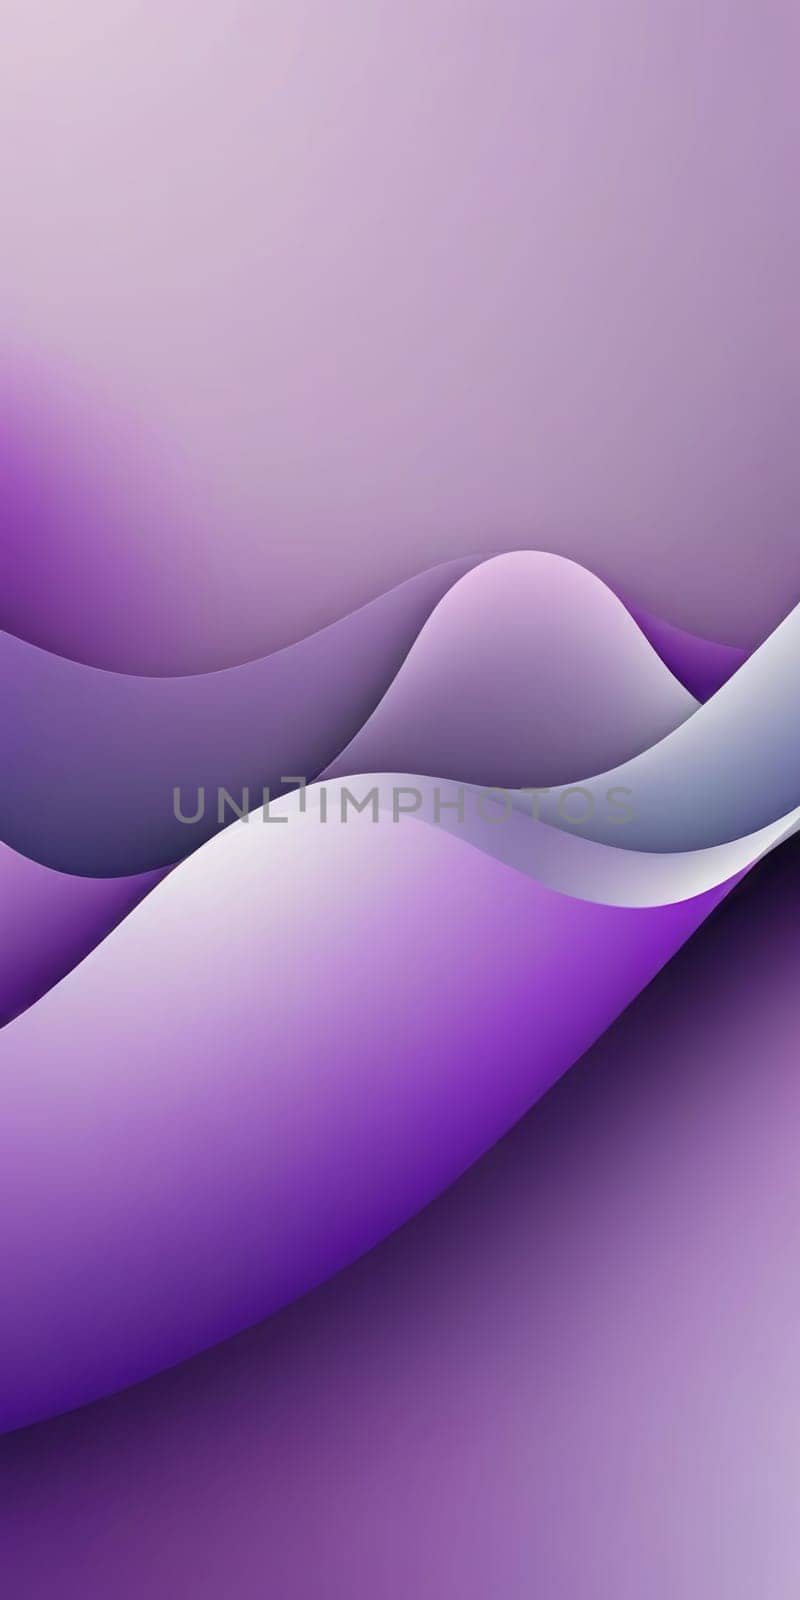 Sigmoid Shapes in Purple and Grey by nkotlyar